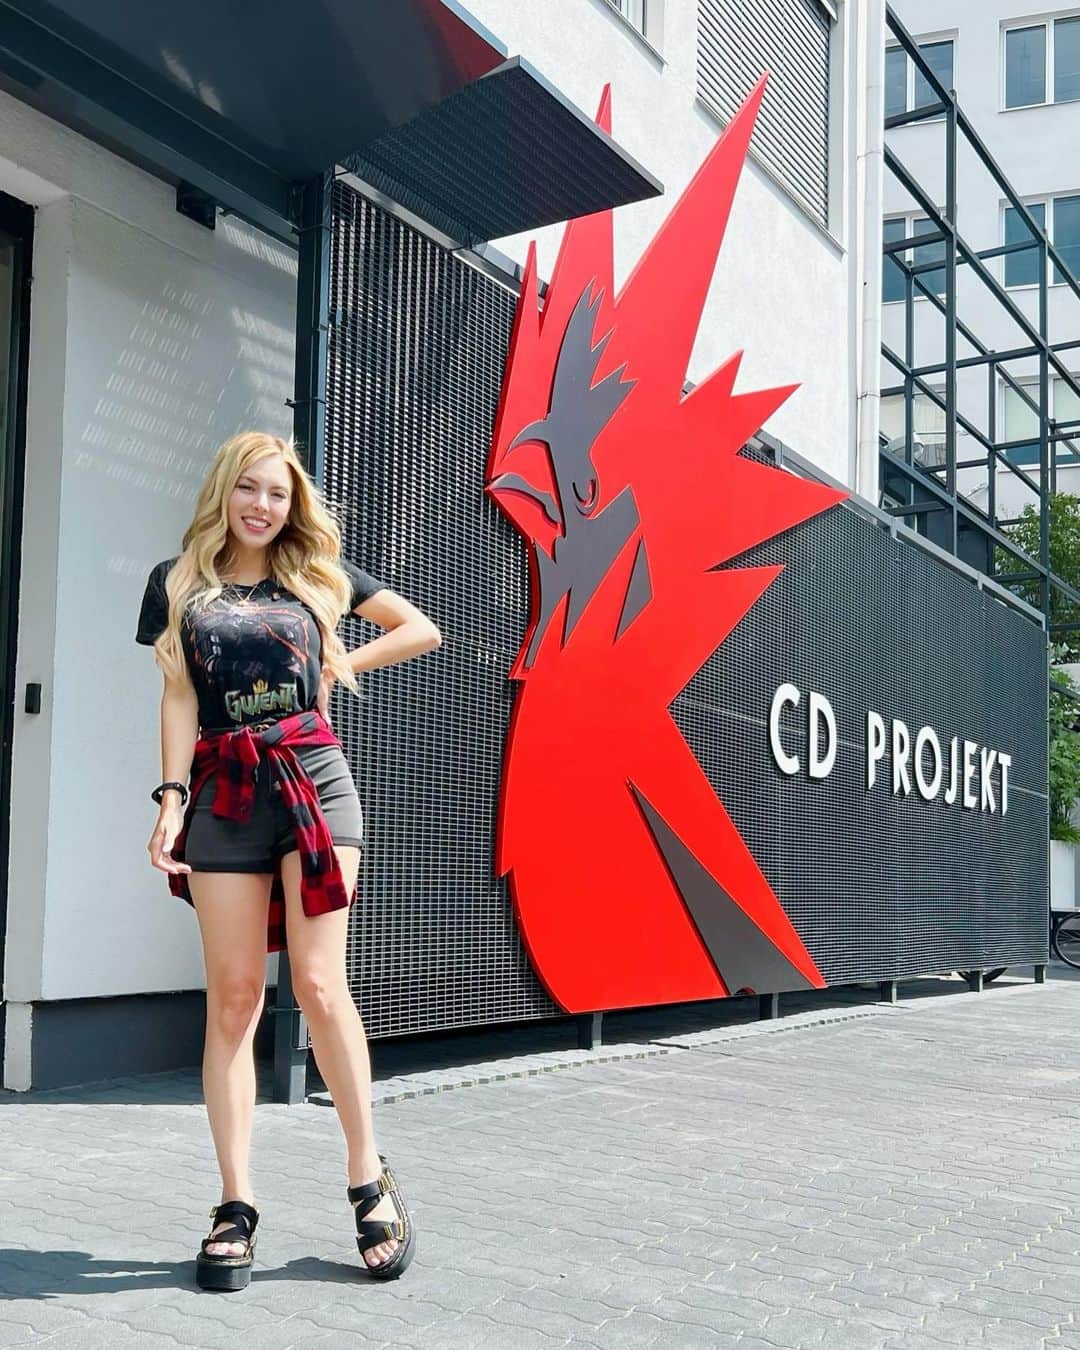 Nadya Antonのインスタグラム：「🇵🇱CD Projekt Warsaw ✨ Today I had the chance to visit my most special Video game company in their headquarters in Warsaw Poland for their 20 Anniversary 🥹 They were one of the first companies that believe in my talent as a cosplayer and Community manager ❤️ Since 2015 there has been nothing but good friends, great games and amazing experiences. Looking forward for a bright future ✨ #cdprojektred #thewitcher #poland」